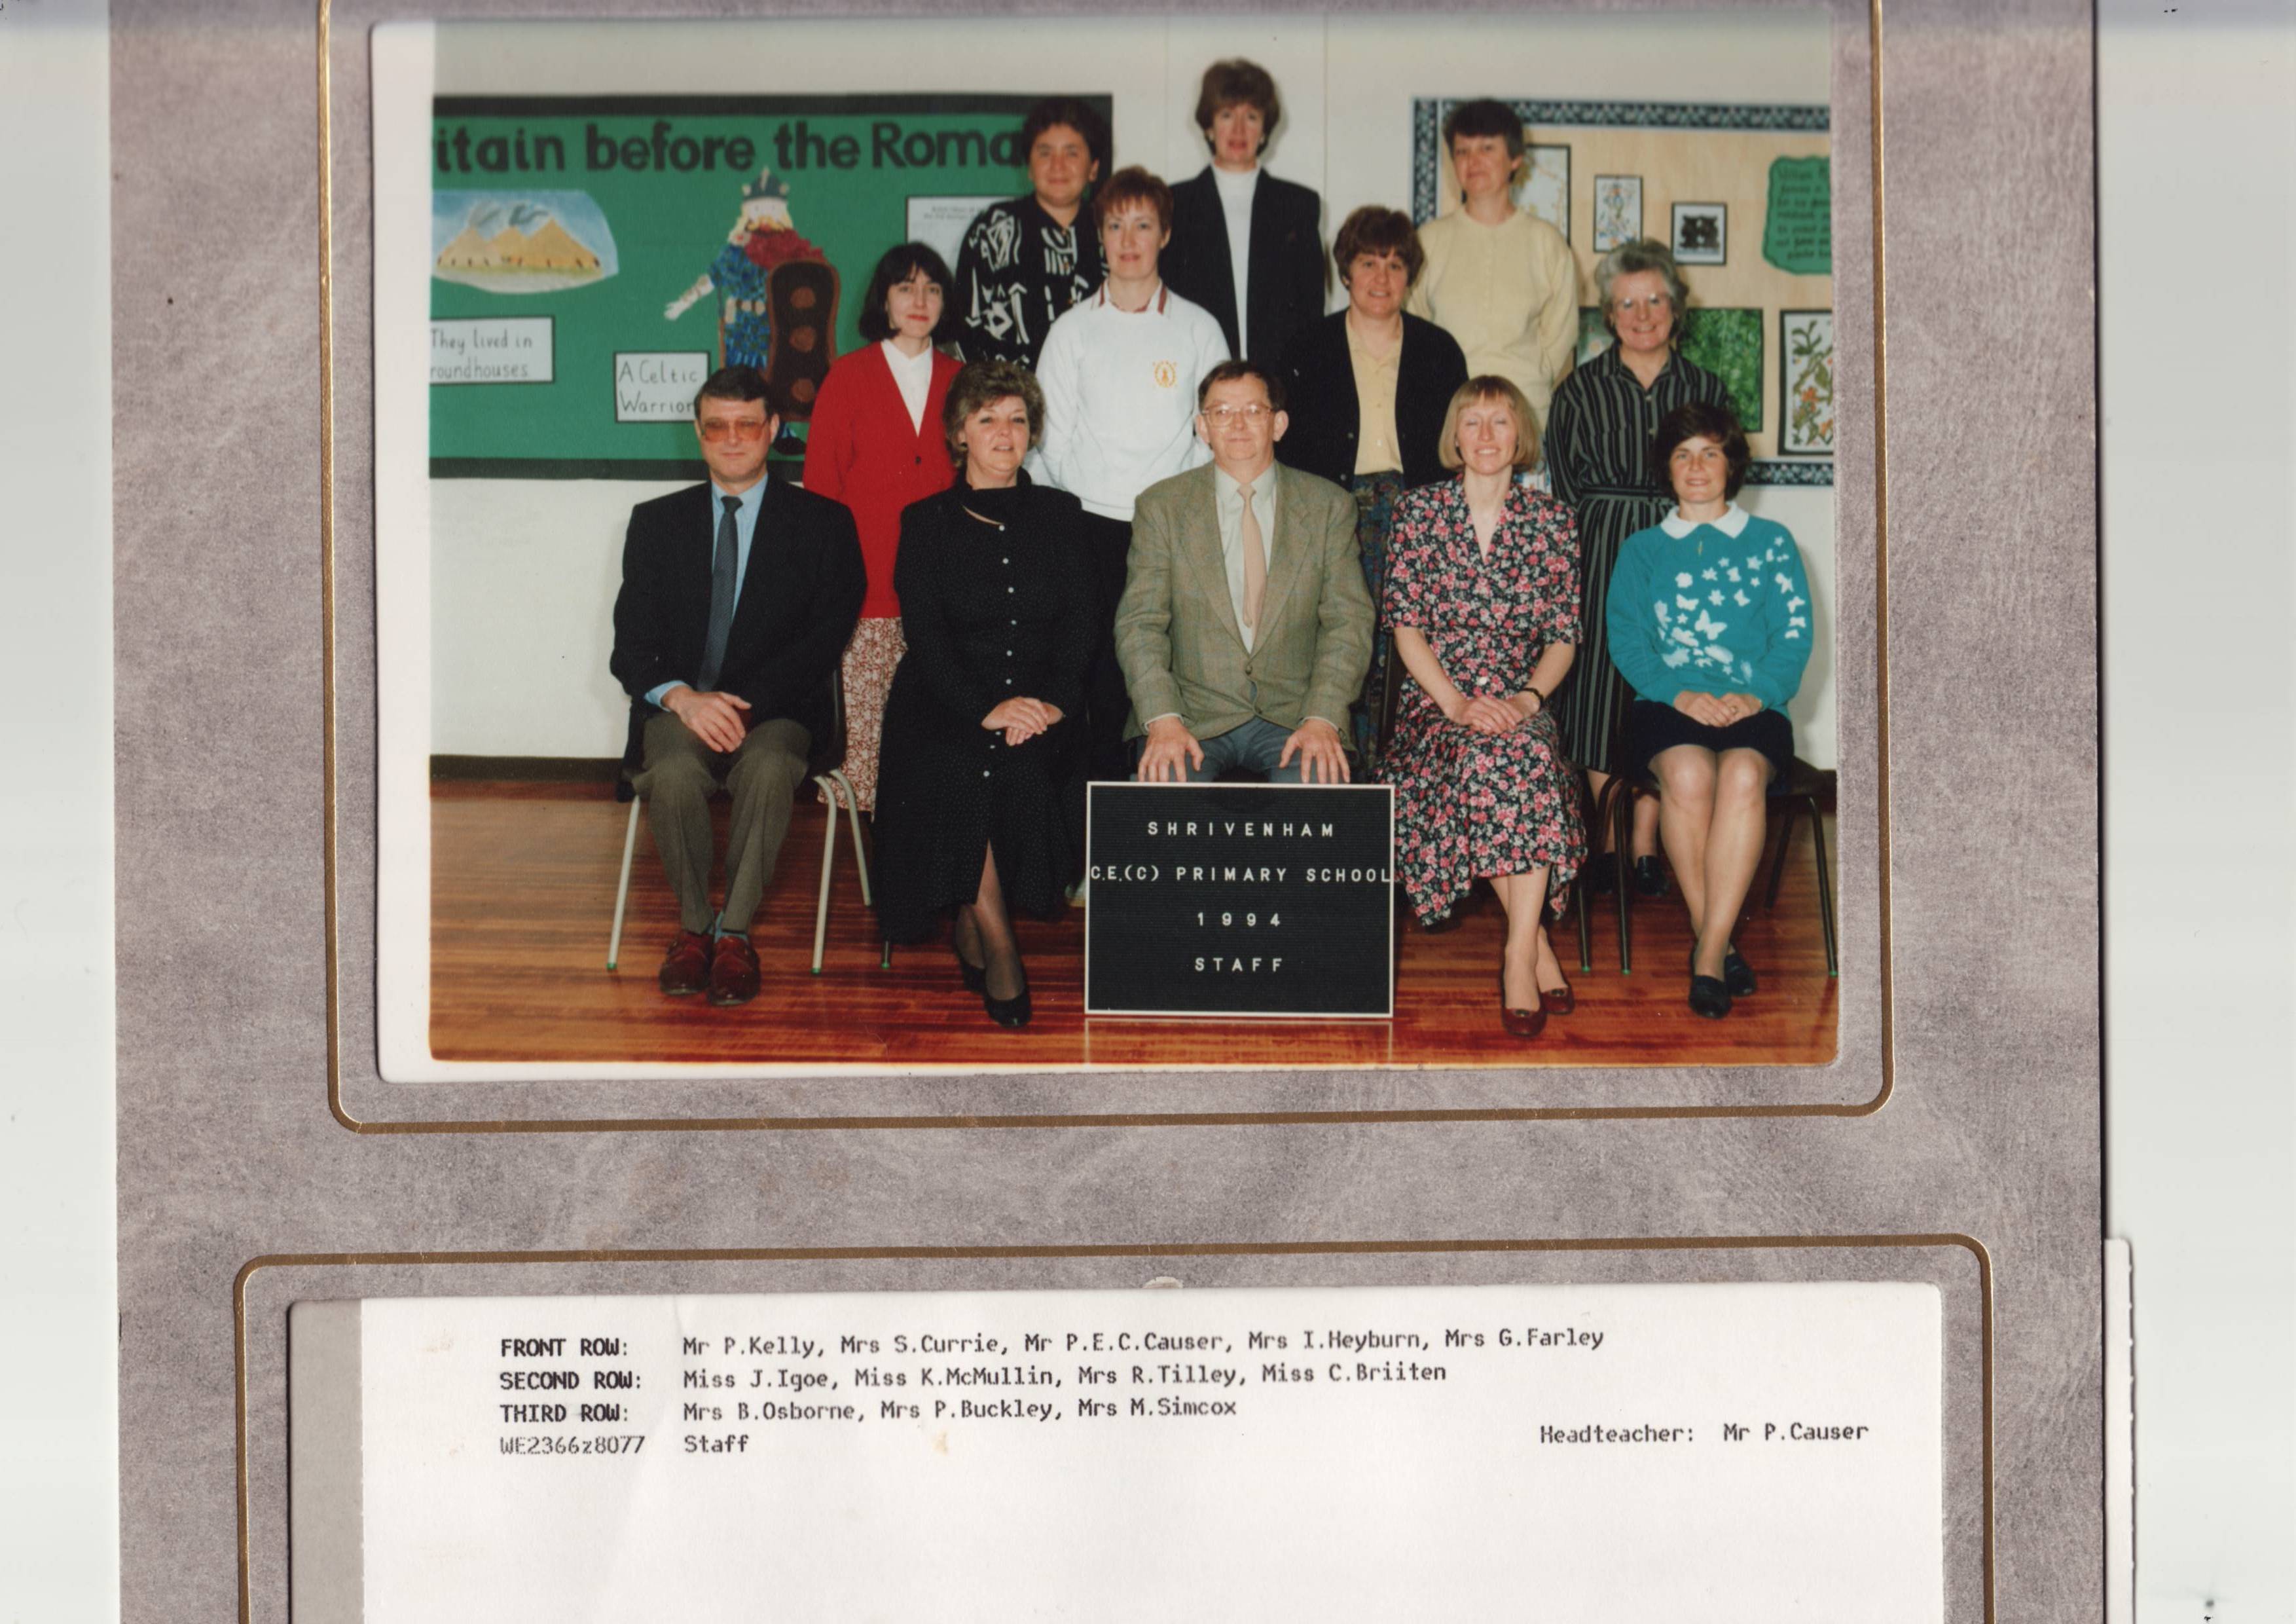 The staff of 1994